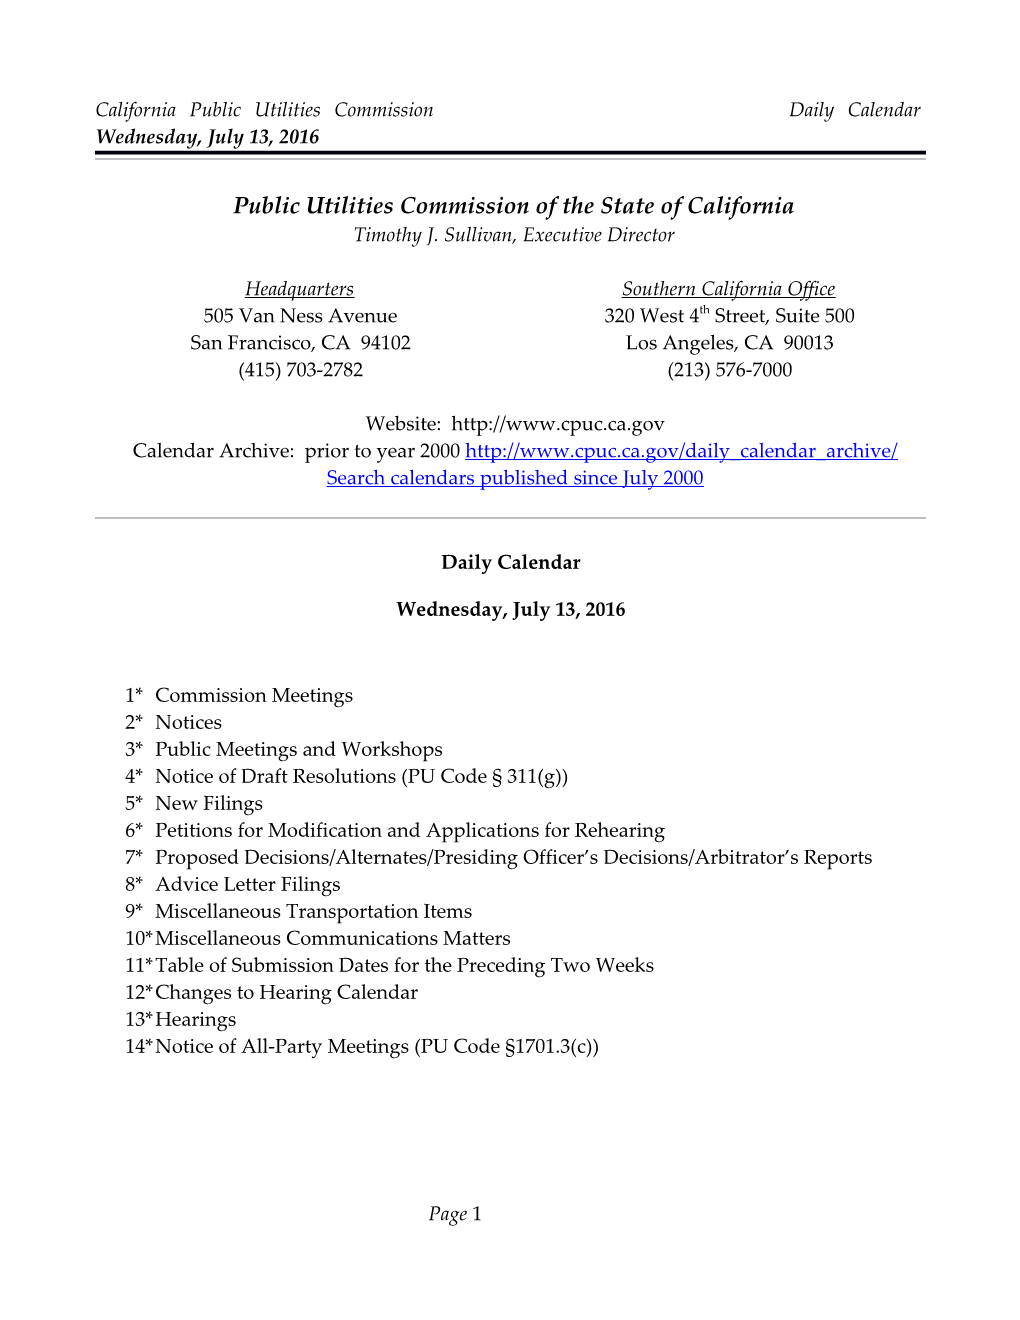 California Public Utilities Commission Daily Calendar Wednesday, July13, 2016